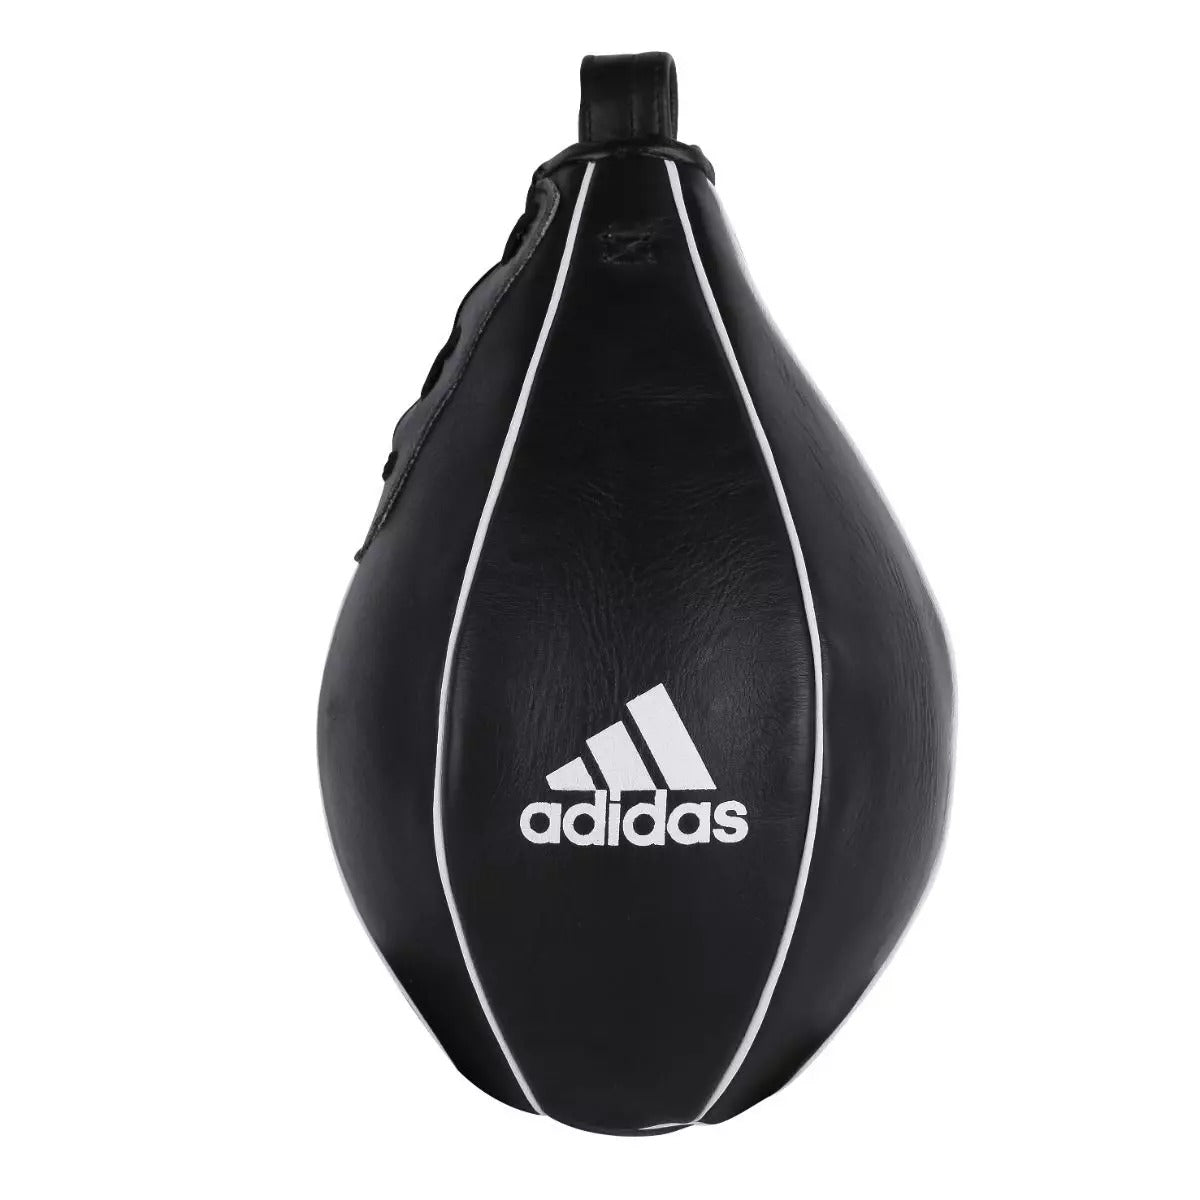 adidas Leather Boxing Speed Ball Striking Punch Bag